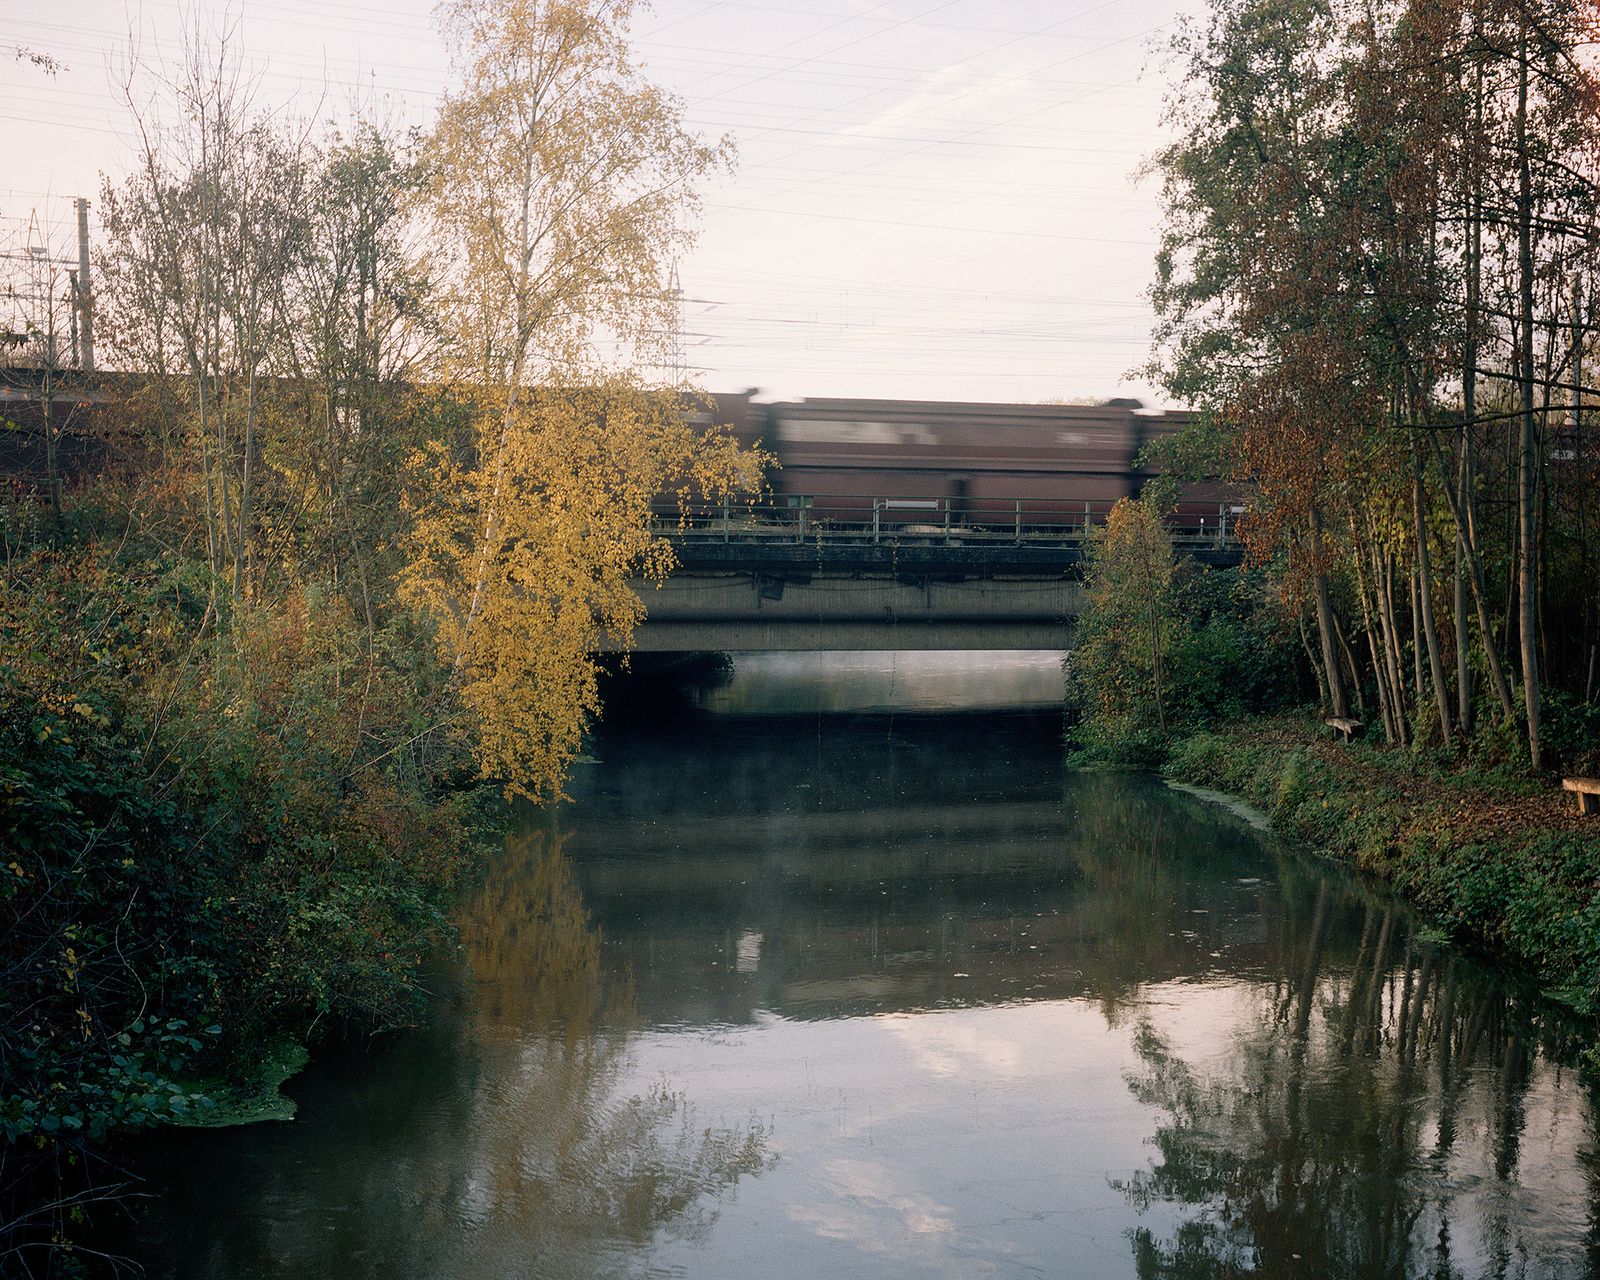 © Pietro Viti - Image from the The coal file vol.2: Das Braunkholeland photography project